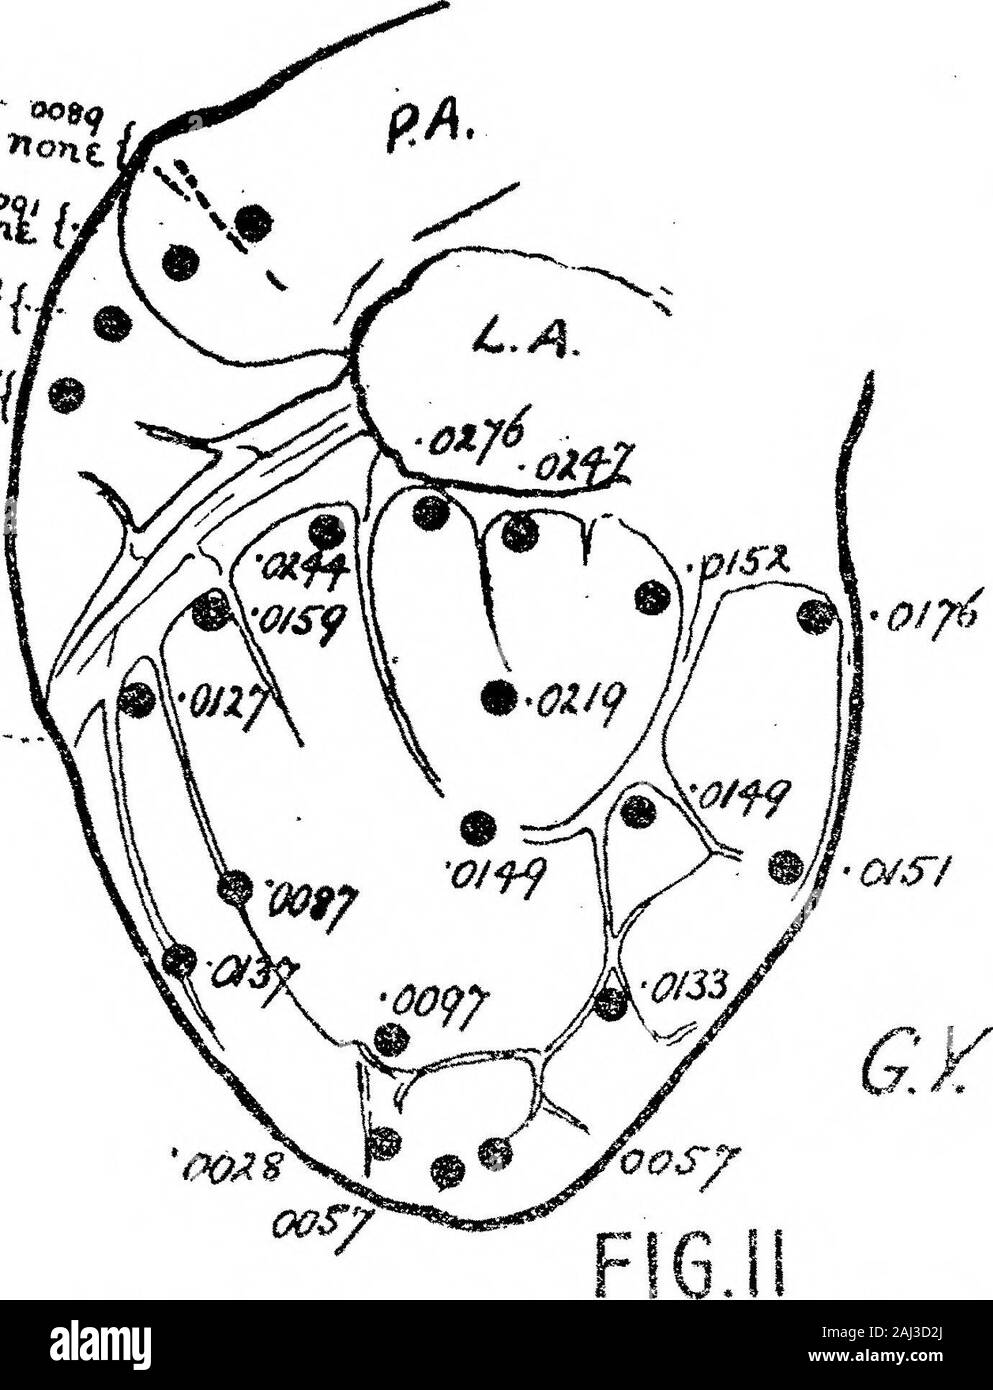 The Excitatory Process in the Dog's Heart Part II The Ventricles . - QOtKJ ?nont i 0X38 V - oamO/f-f JZB.L.. Figs. 6, 7, and 8.—Outlines (f natural size) to scale of the right surface of three dogs hearts (G.T., G.W.,and 6.X.); giving the time-readings of the intrinsic deflections at a number of points. The viewof the heart is not quite the same in the three diagrams. S.Y.C. - superior vena cava; I.V.C. =inferior vena cava; R.A.= right appendix; D.B.E. = descending branch of right coronary artery;D.B.L. = descending branch of left artery; L.Vo. =- vortex of left ventricle. Figs. 9, 10, and 11. Stock Photo